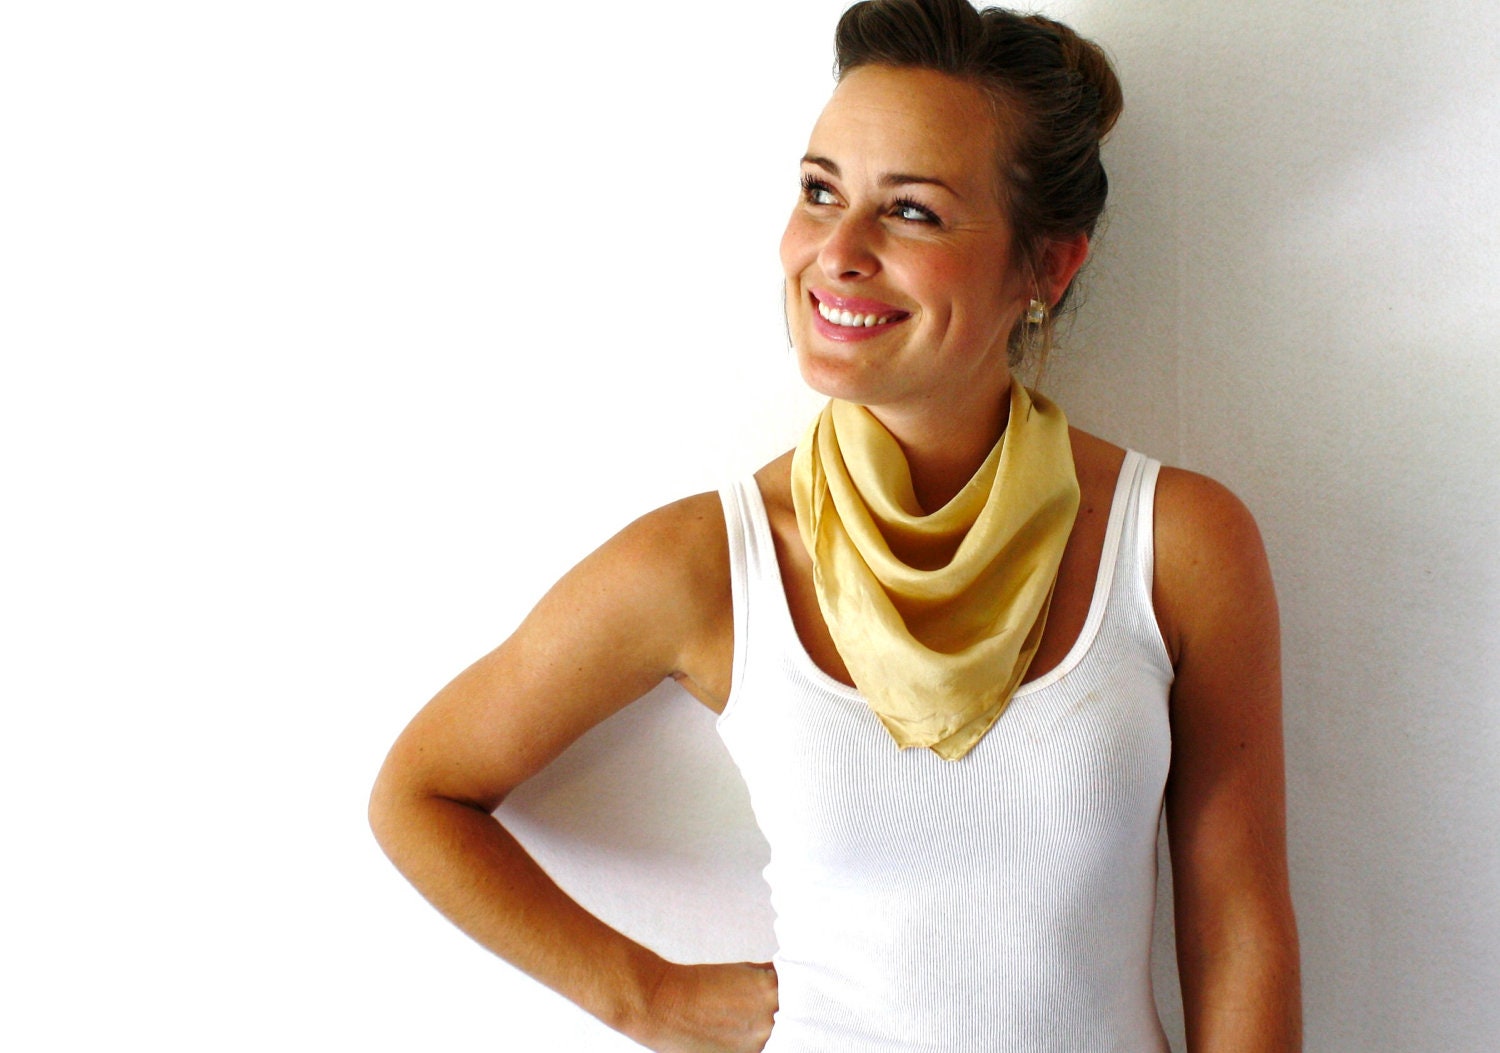 Gold Silk Scarf - Natural Dye- Hand Dyed Silk Scarf - Spring Fashion -Tan Scarf - Autumn - Mothers Day Gift - TheSilkMoon